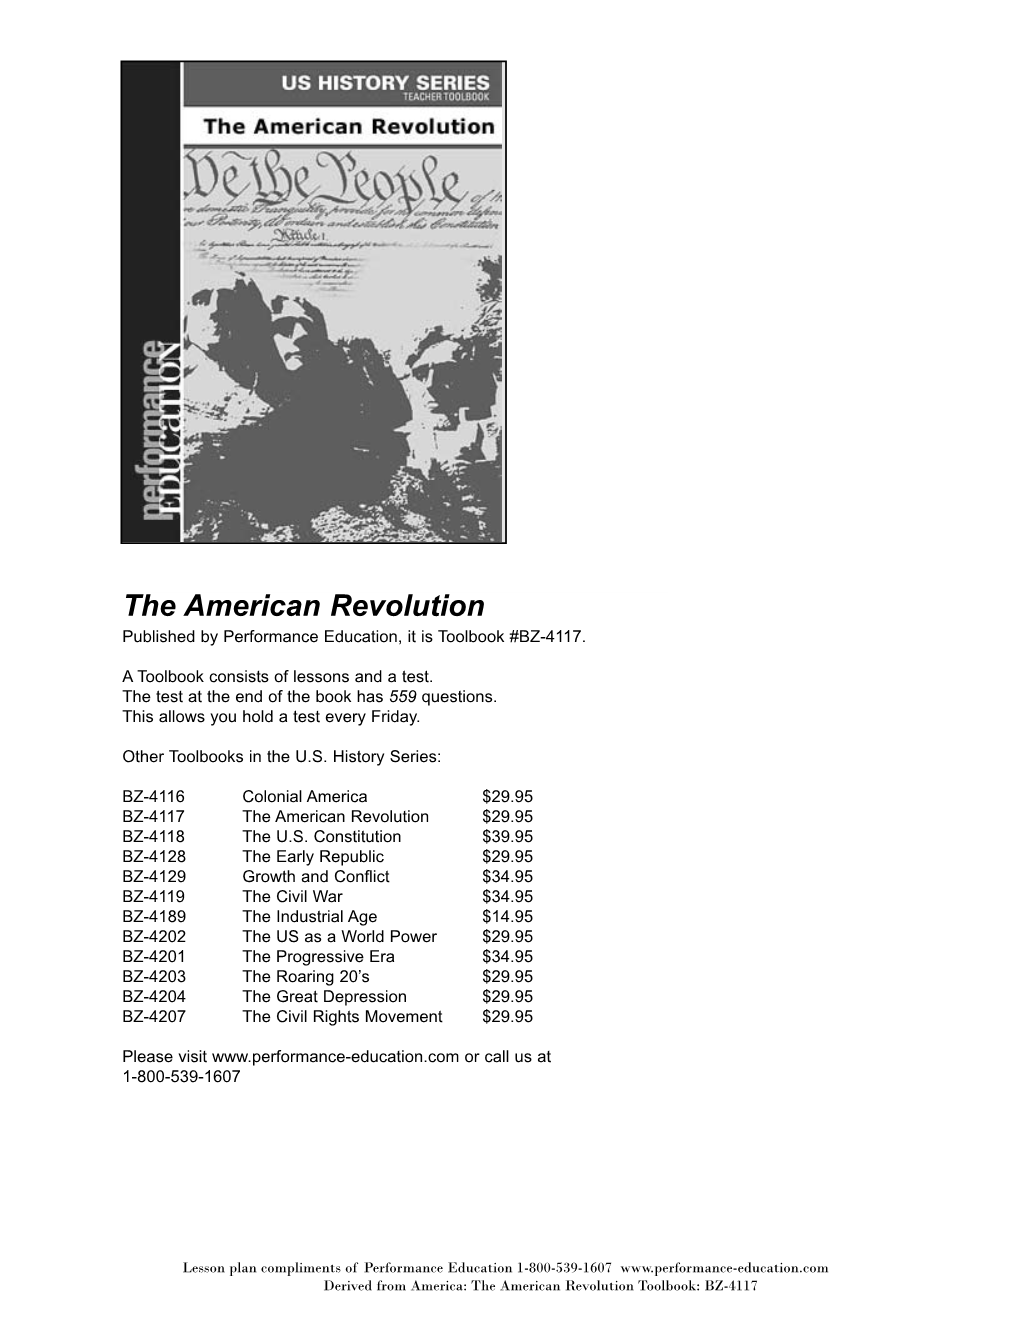 The American Revolution Published by Performance Education, It Is Toolbook #BZ-4117